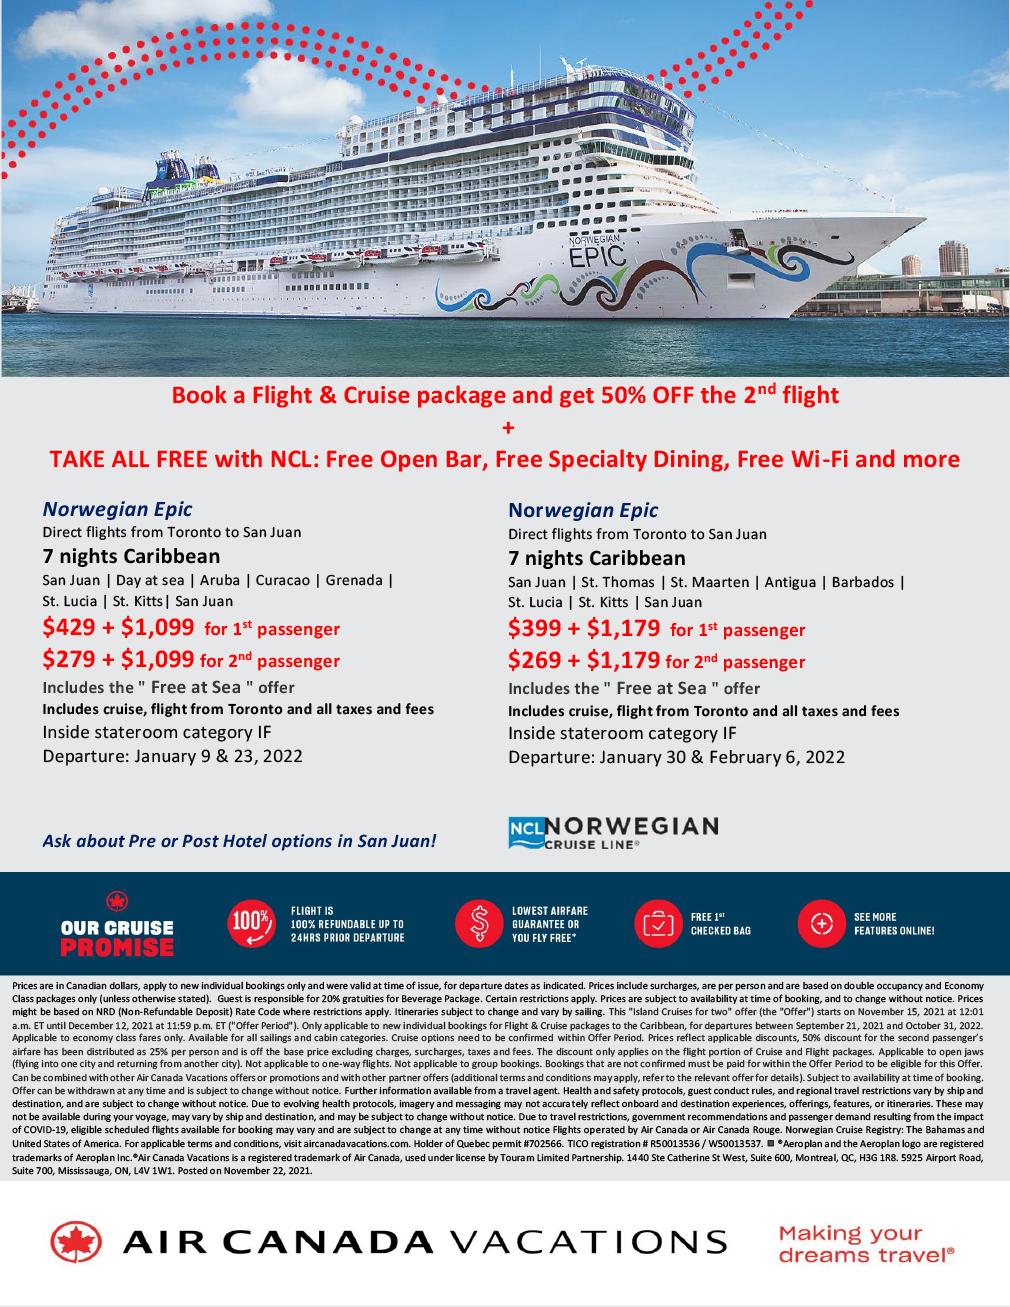 Book A Flight & Cruise Package And Get 50% Off the 2nd Flight